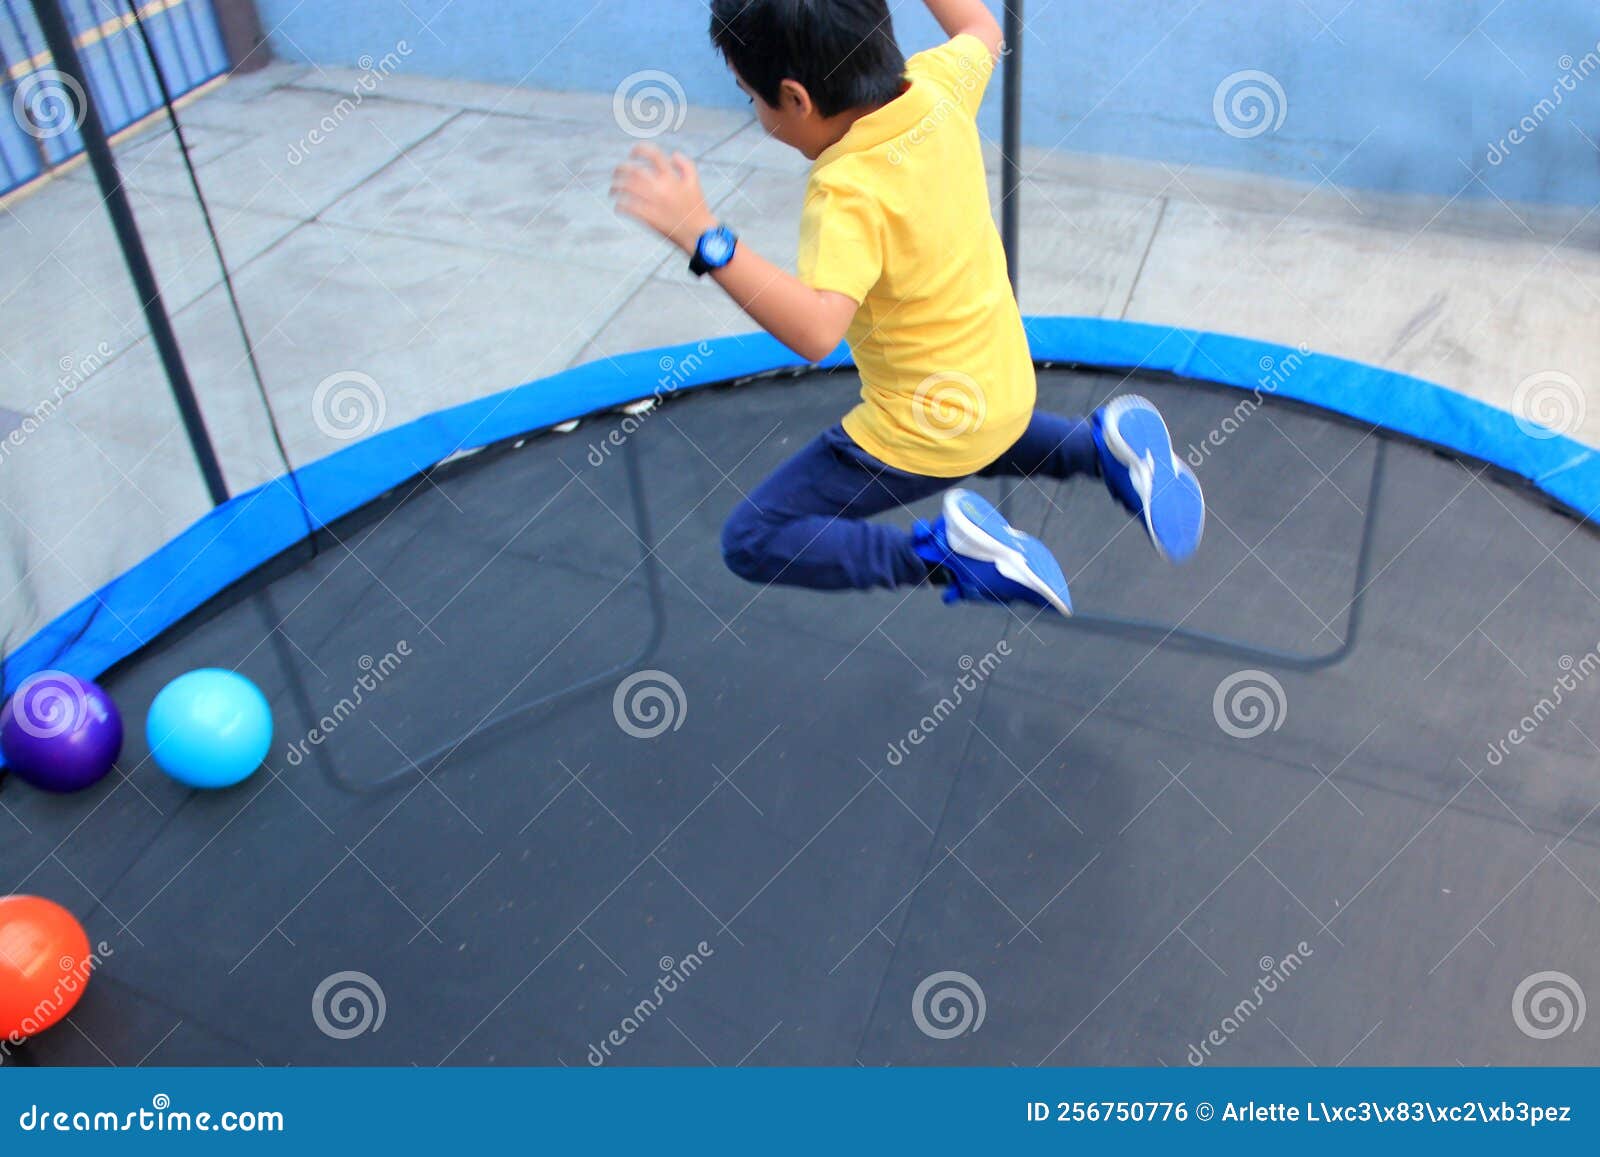 hispanic 6-year-old boy jumping on a brincolin as a physical activity for a healthy life he exercises and has fun alone at home